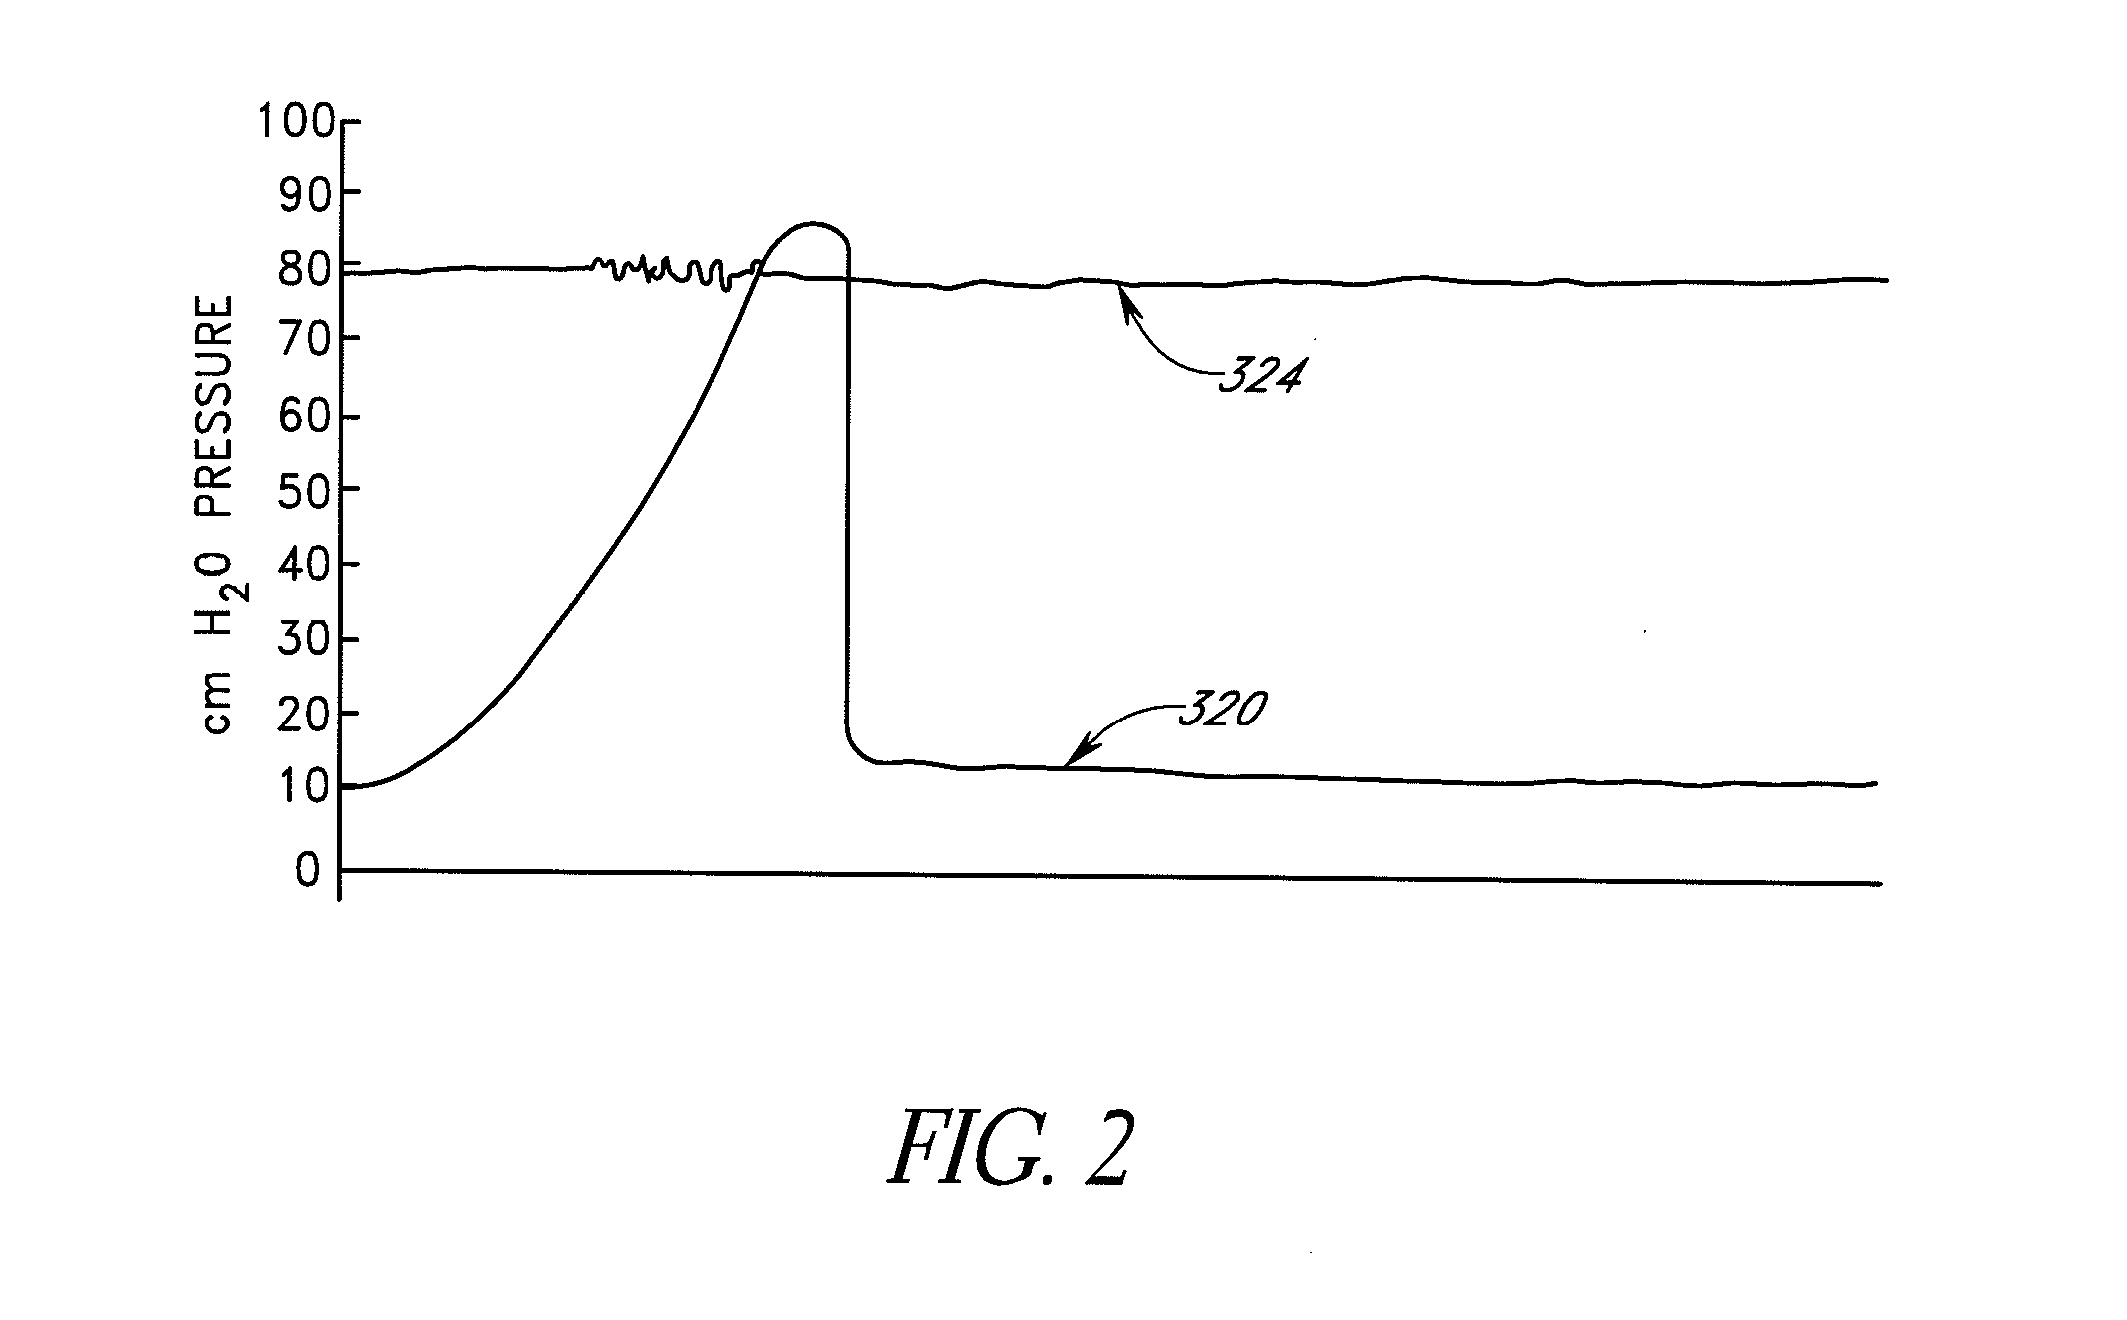 Attenuation device for treating glaucoma